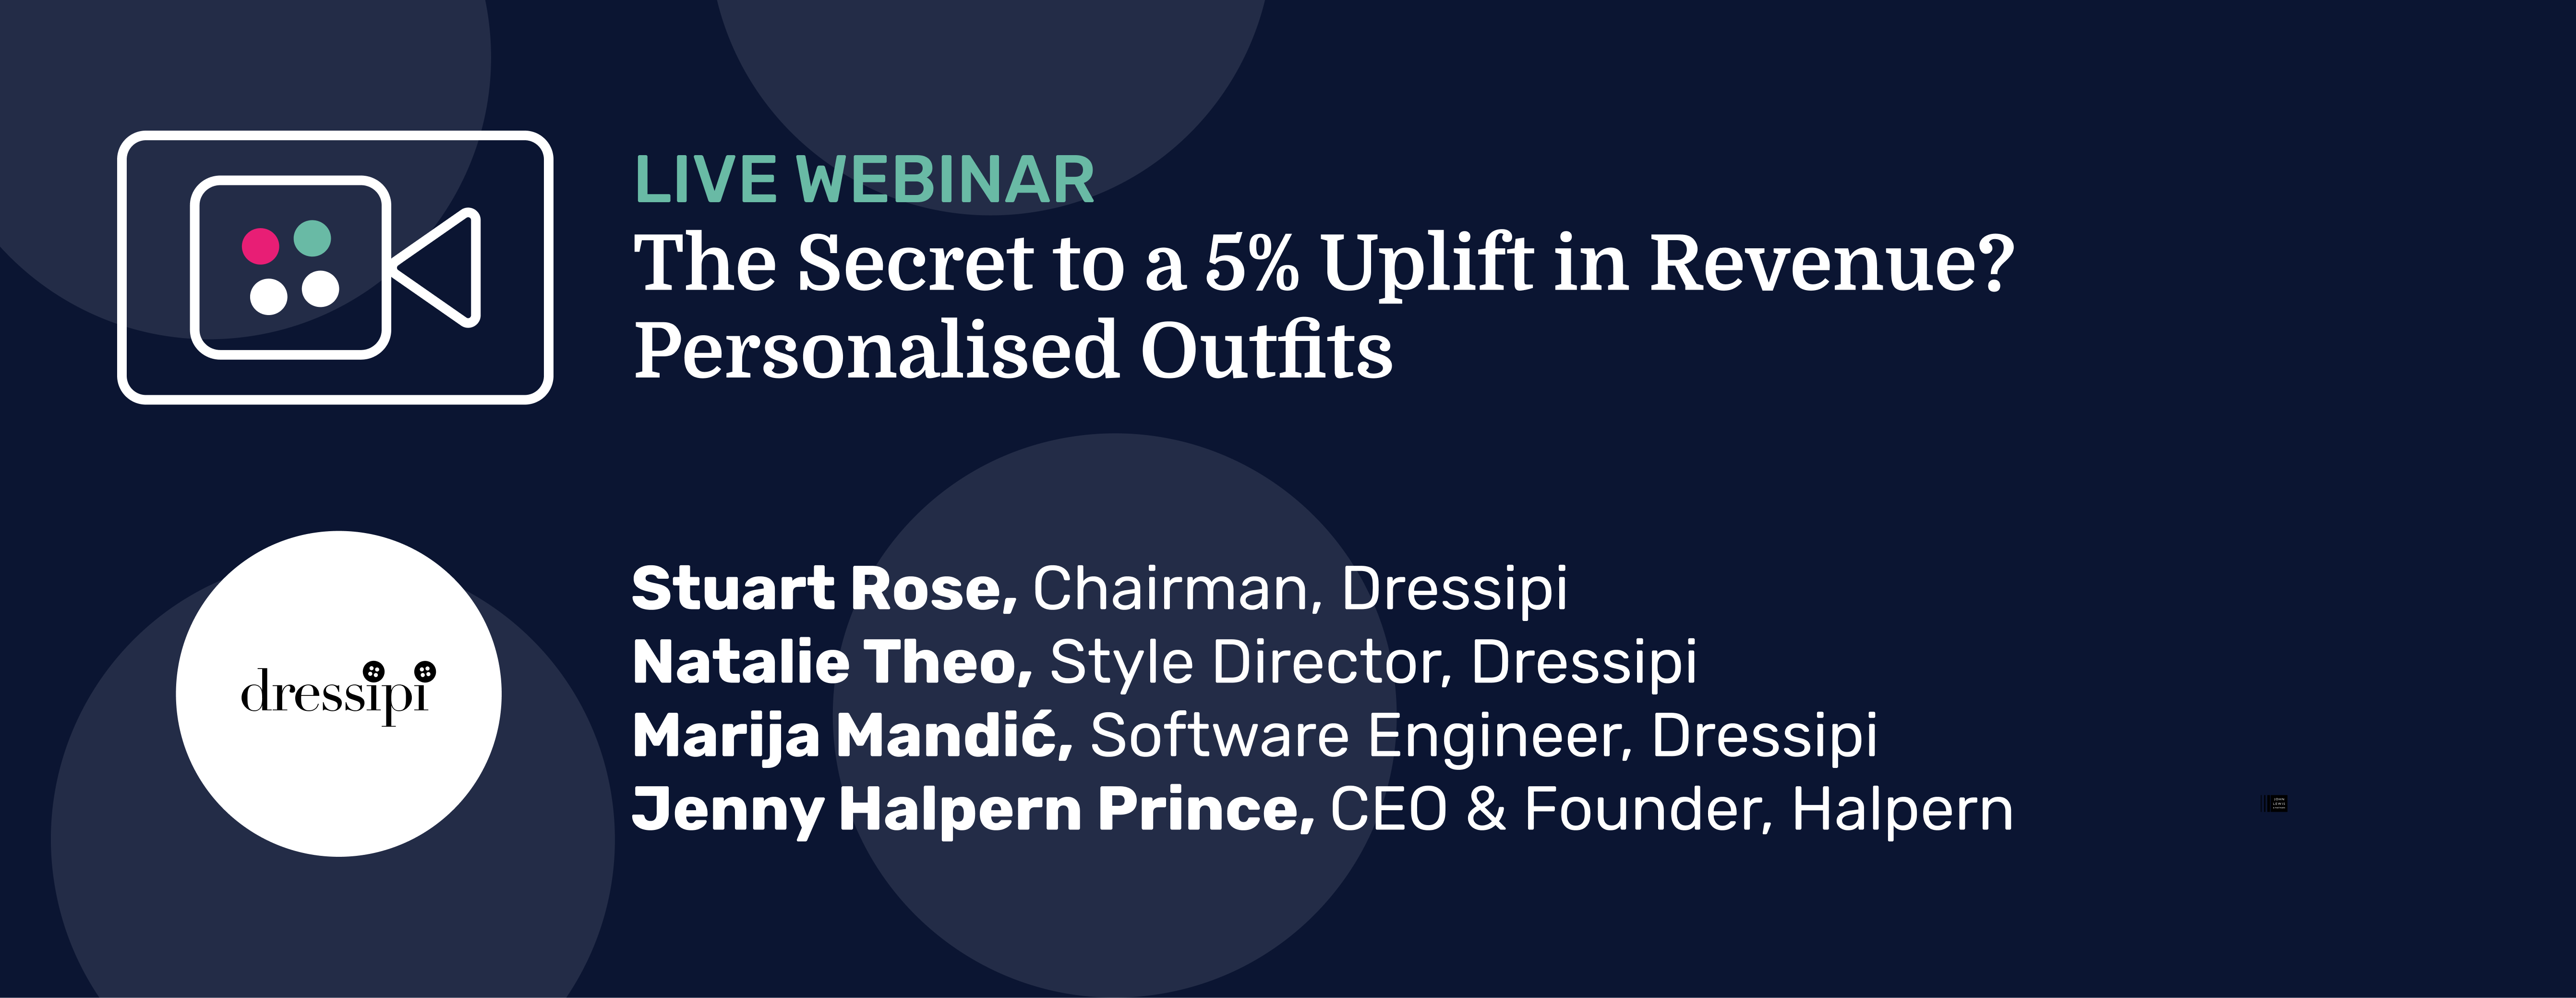 Personalized Outfits Masterclass: The Top Takeaways